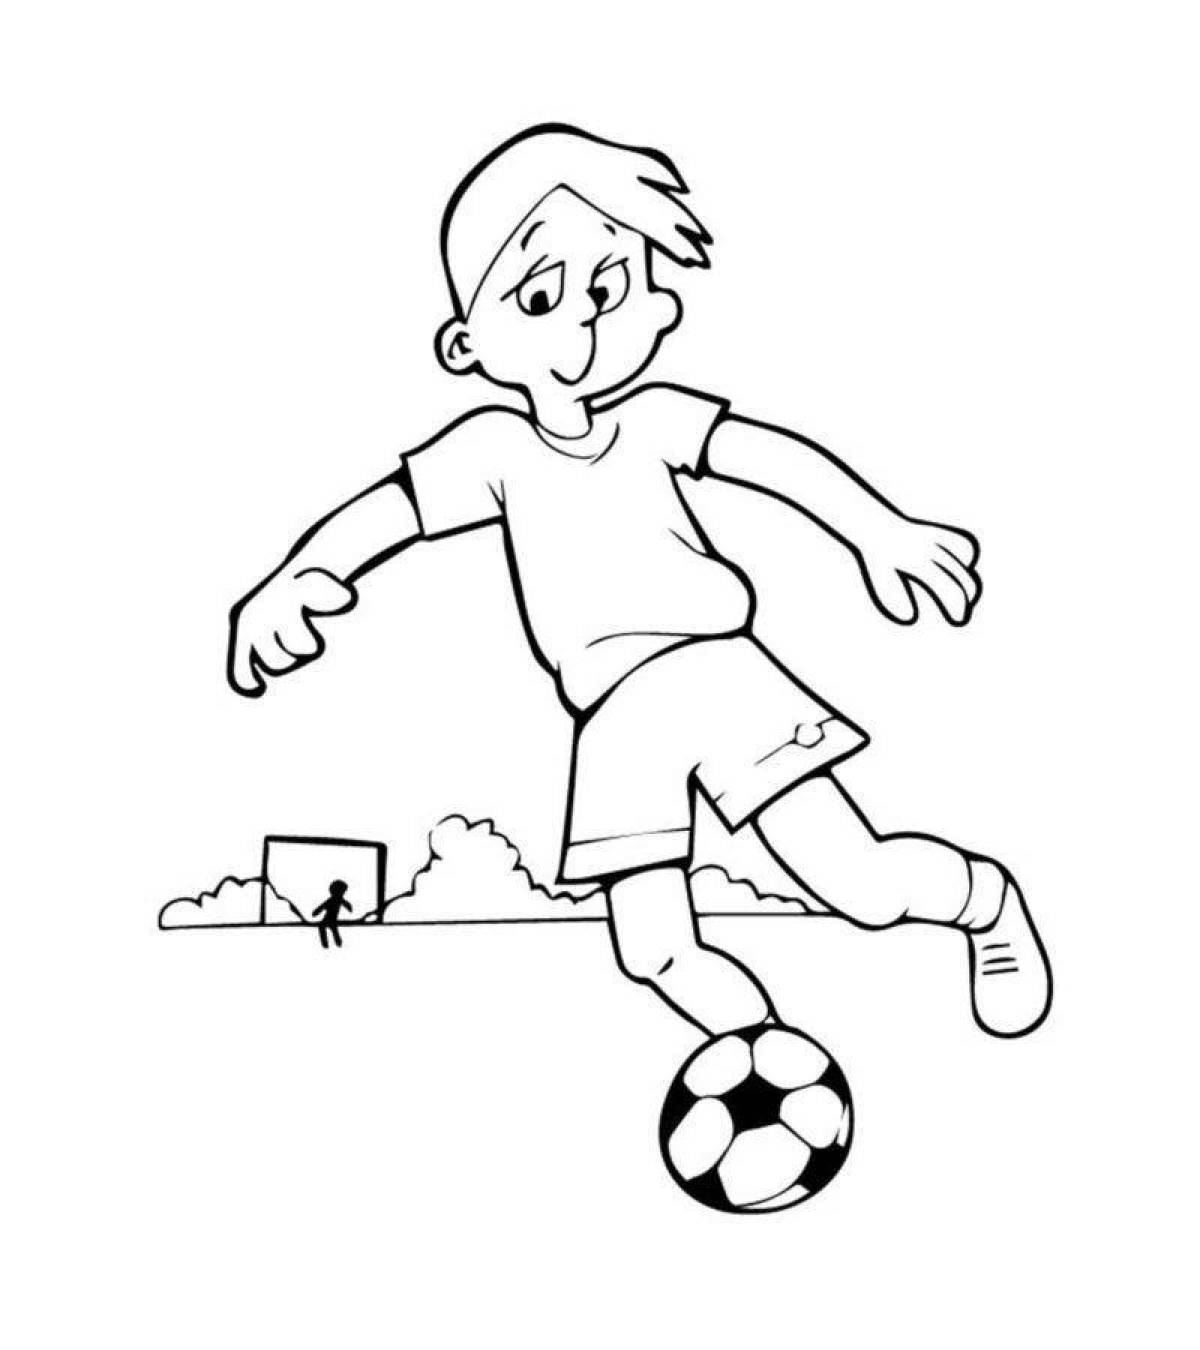 Cheerful football player coloring pages for kids